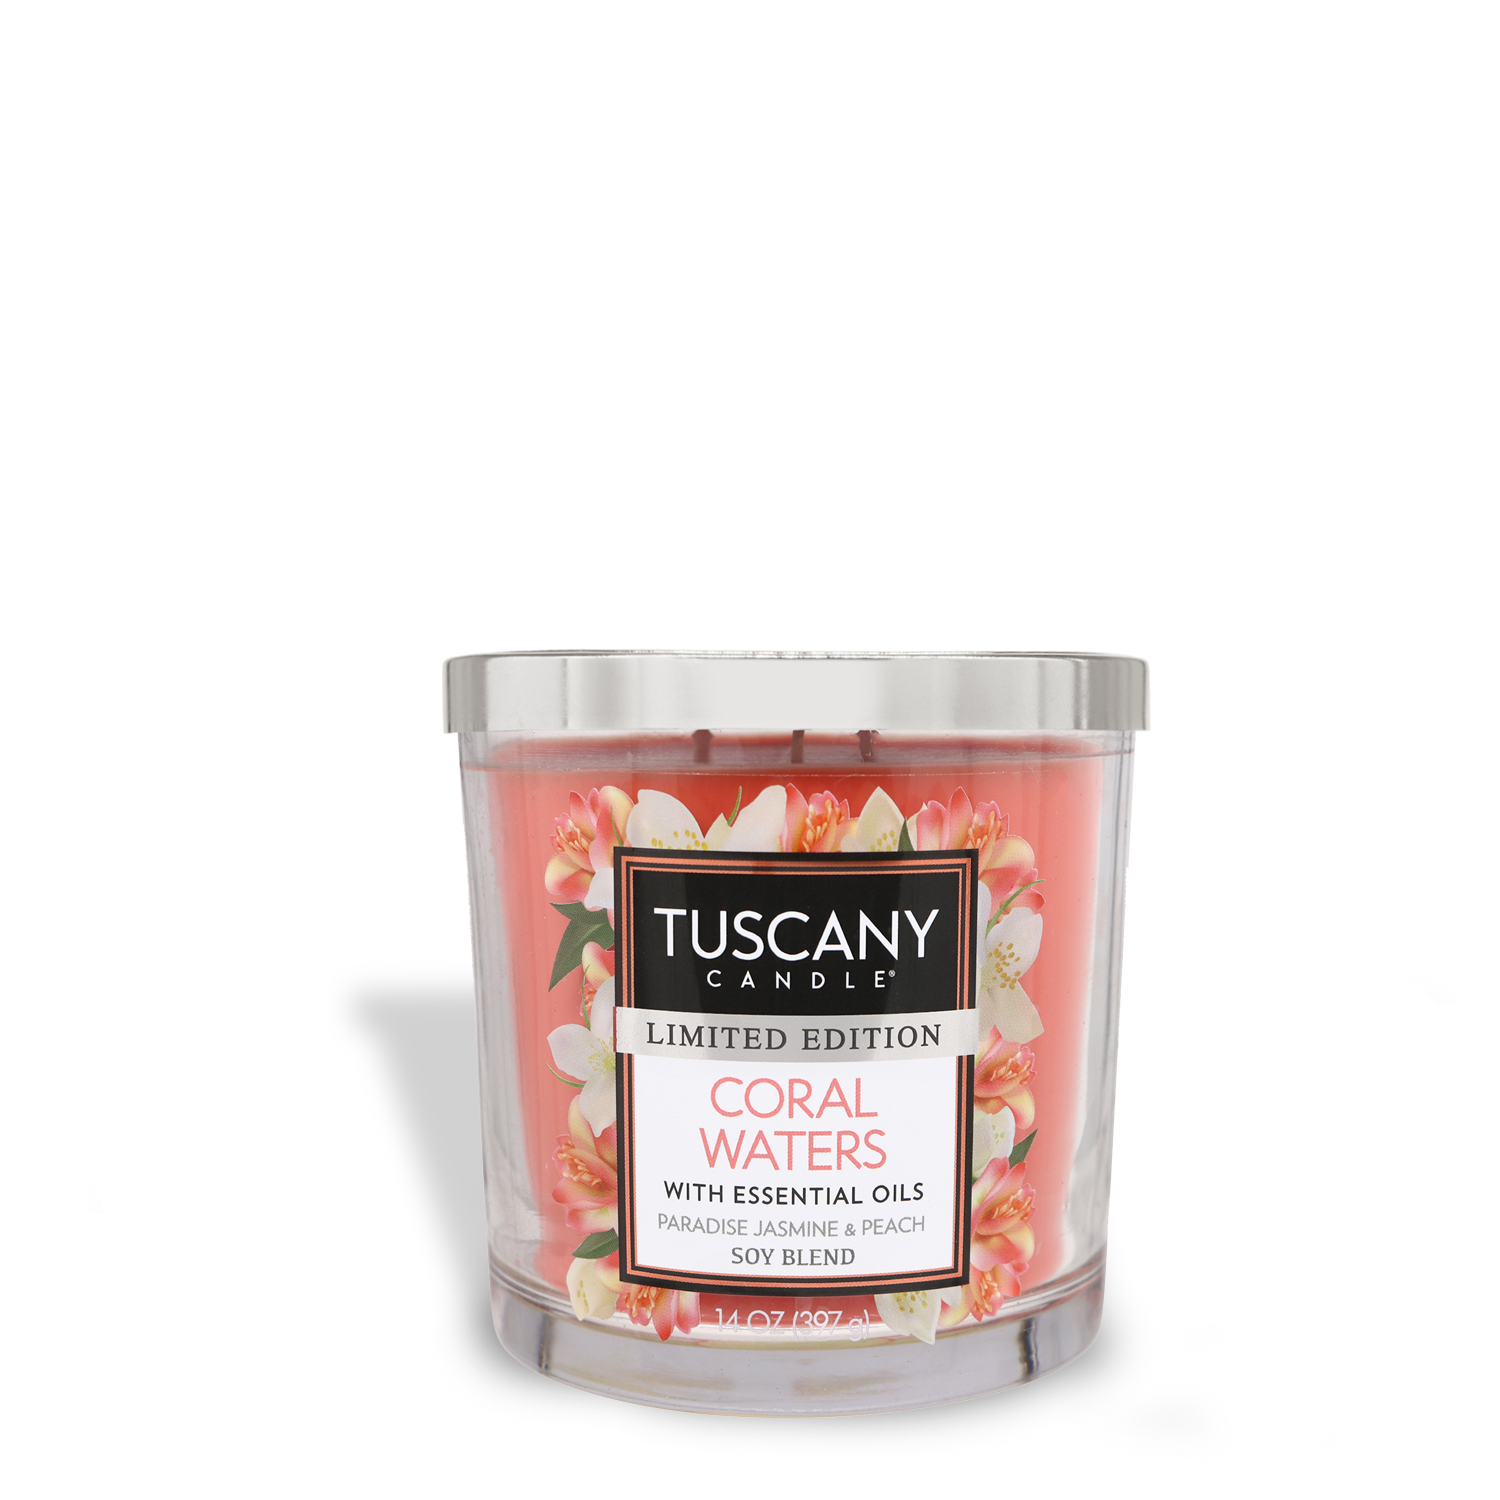 A Tuscany Candle® SEASONAL Coral Waters Long-Lasting Scented Jar Candle (14 oz) with essential oils, featuring notes of paradise jasmine and peach.